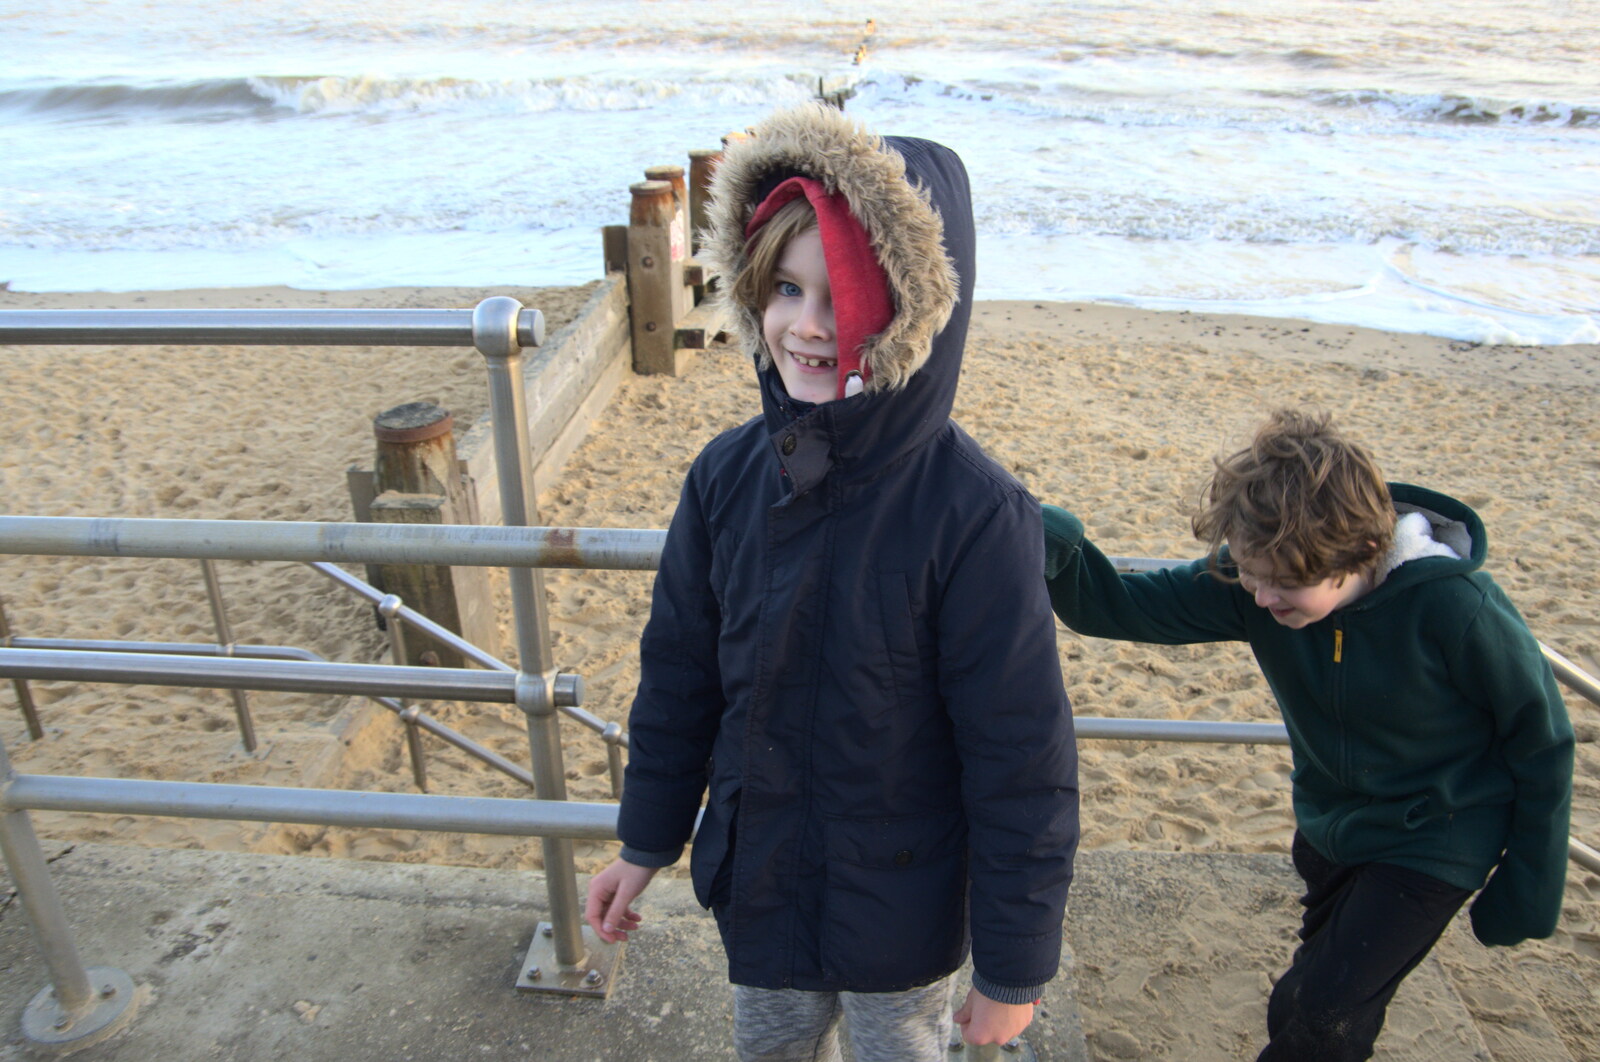 Harry McGap Face from A Return to the Beach, Southwold, Suffolk - 20th December 2020